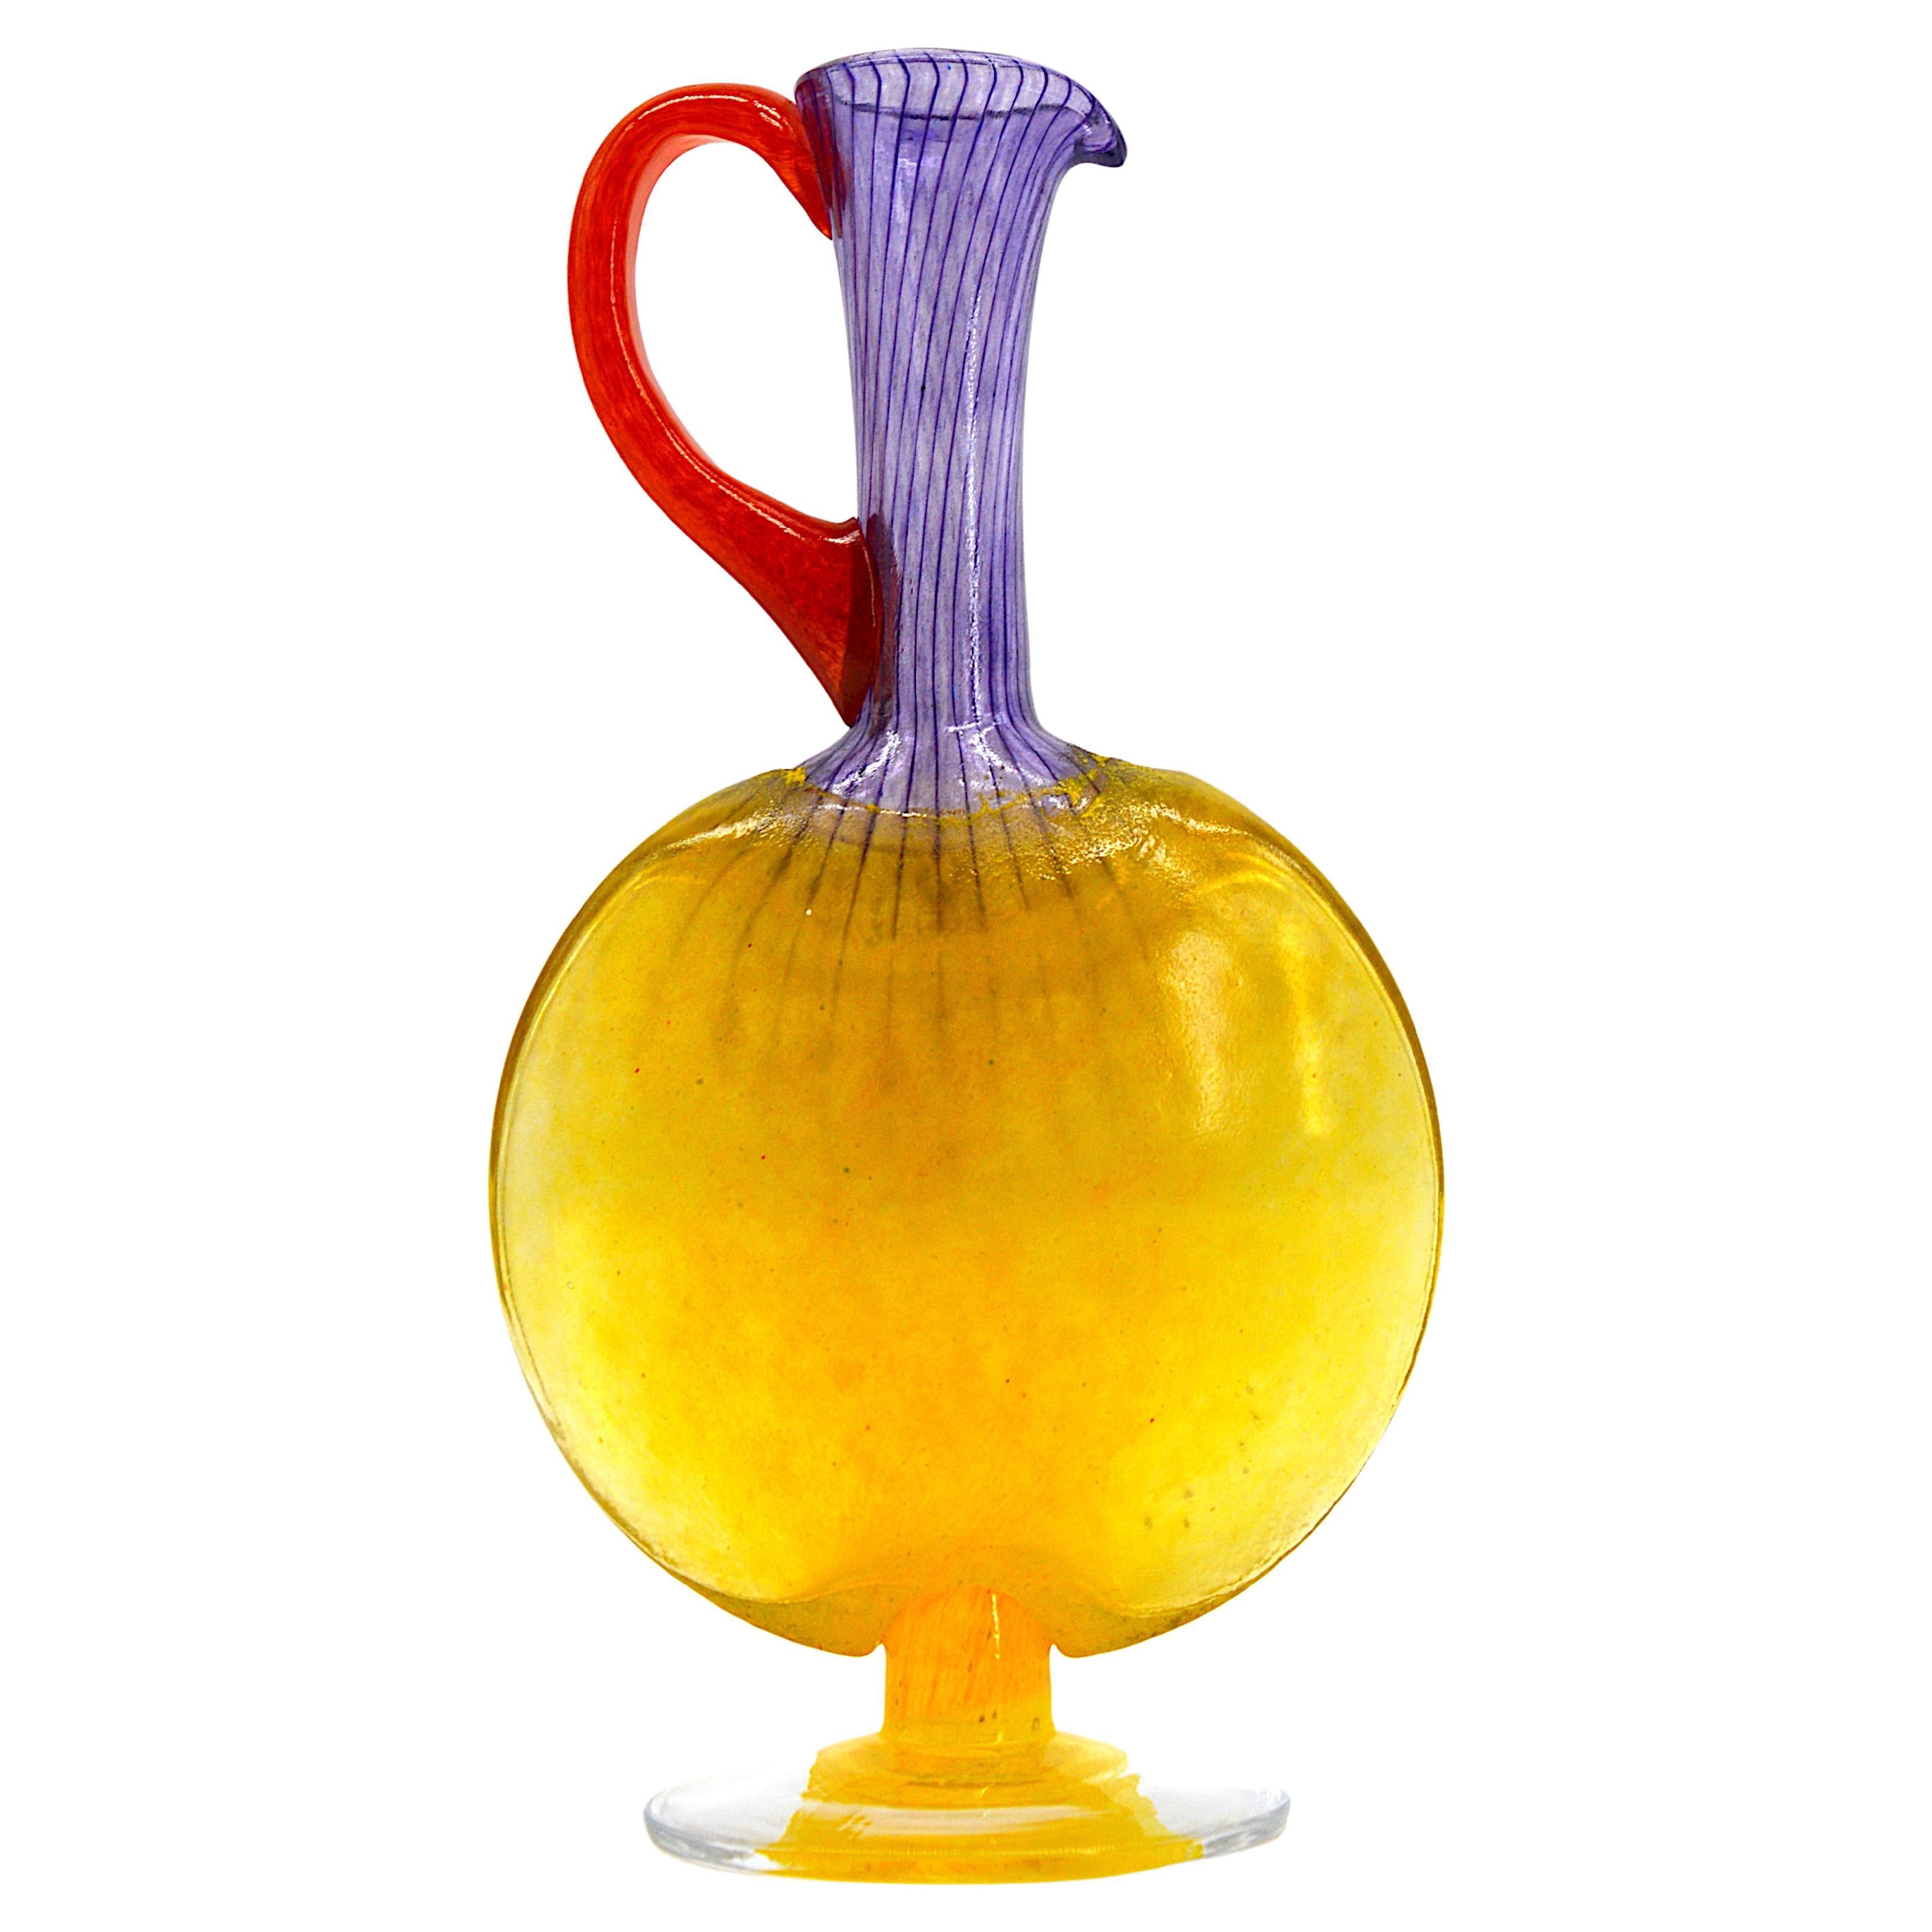 Art glass carafe by Kjell Engman at Kosta-Boda, Sweden, late 1990s. Filigree glass with yellow base and body, purple neck and red handle. Measures: Height 9.5